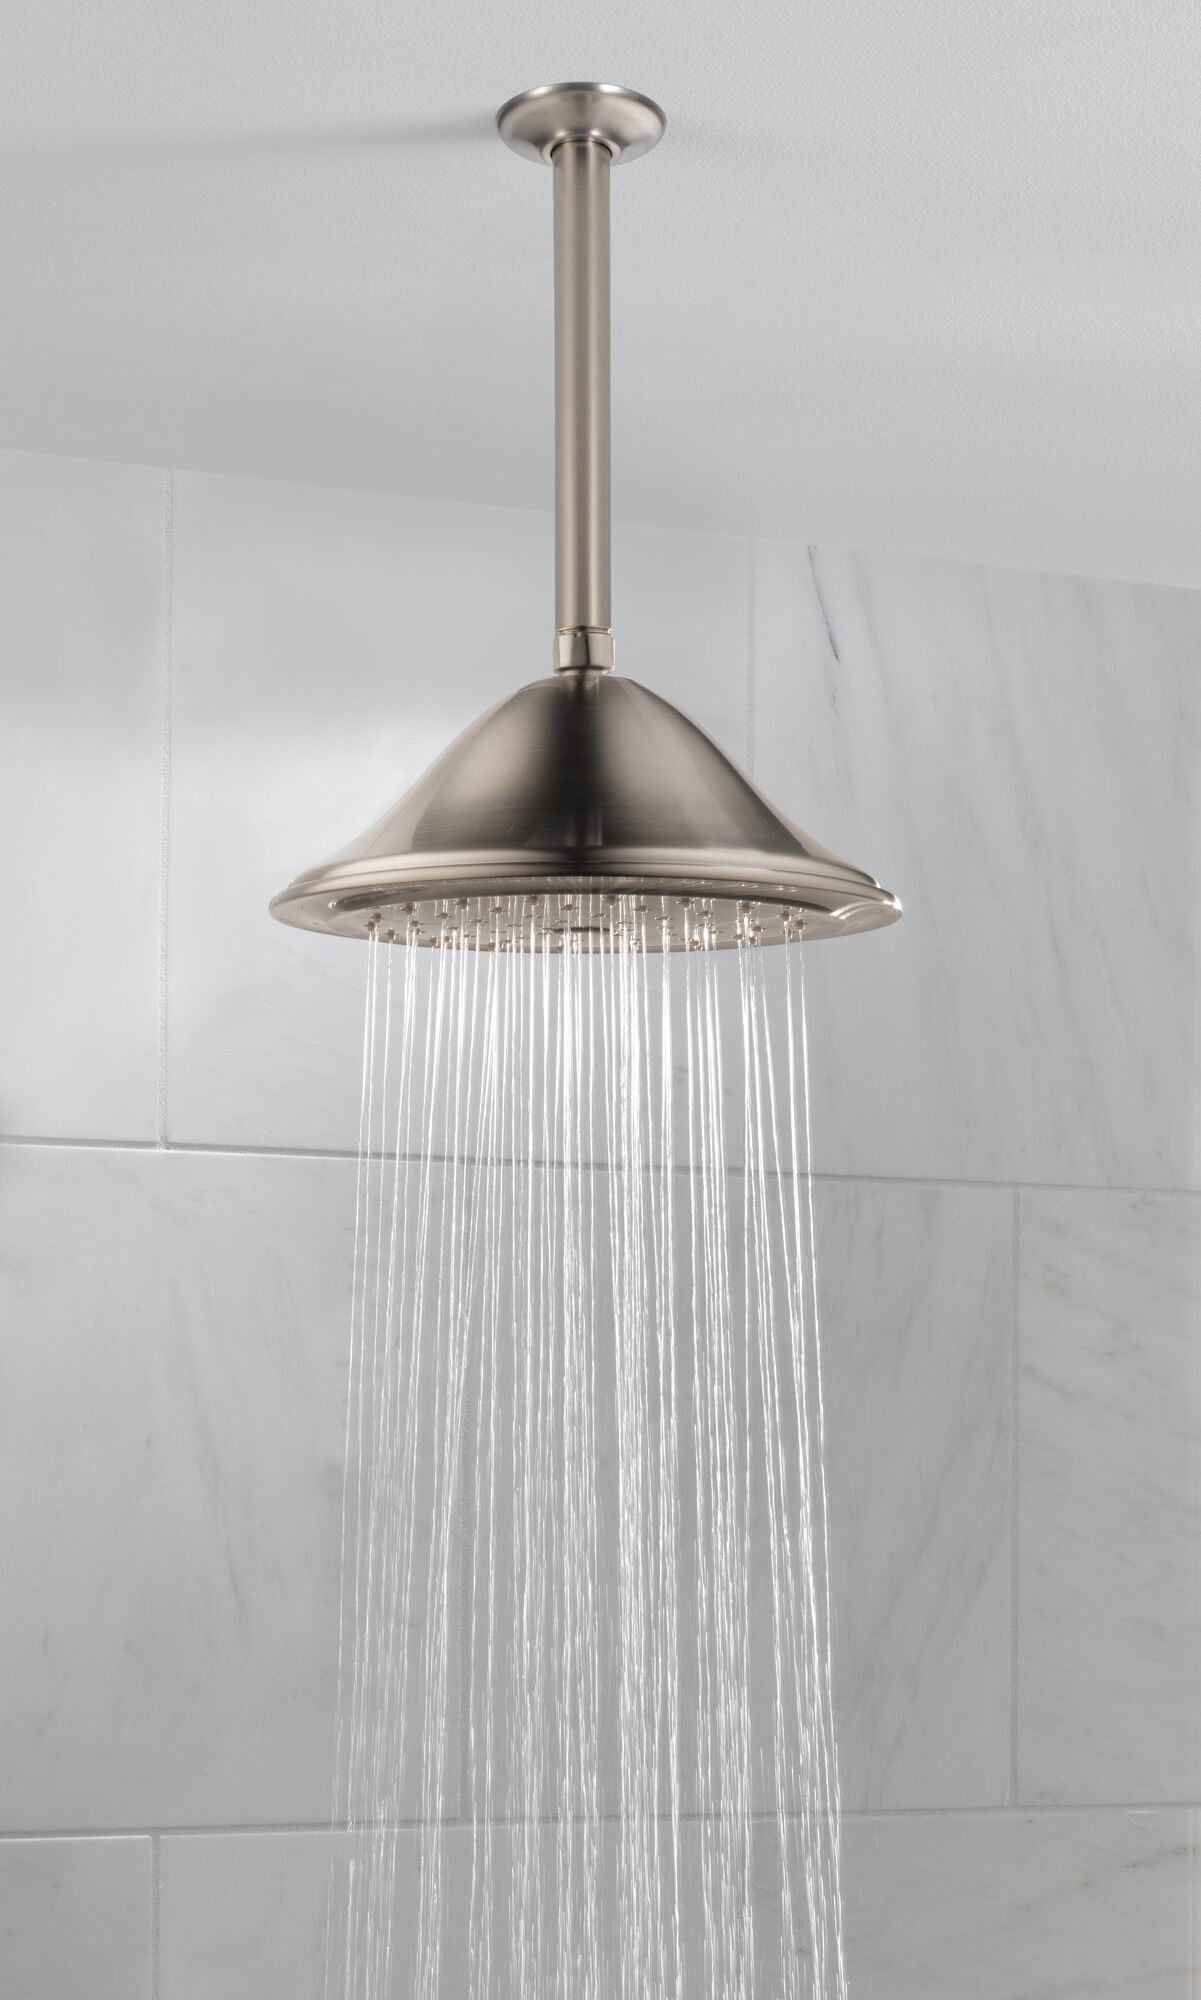 Delta RP72568PN Cassidy Showerhead, Polished Nickel